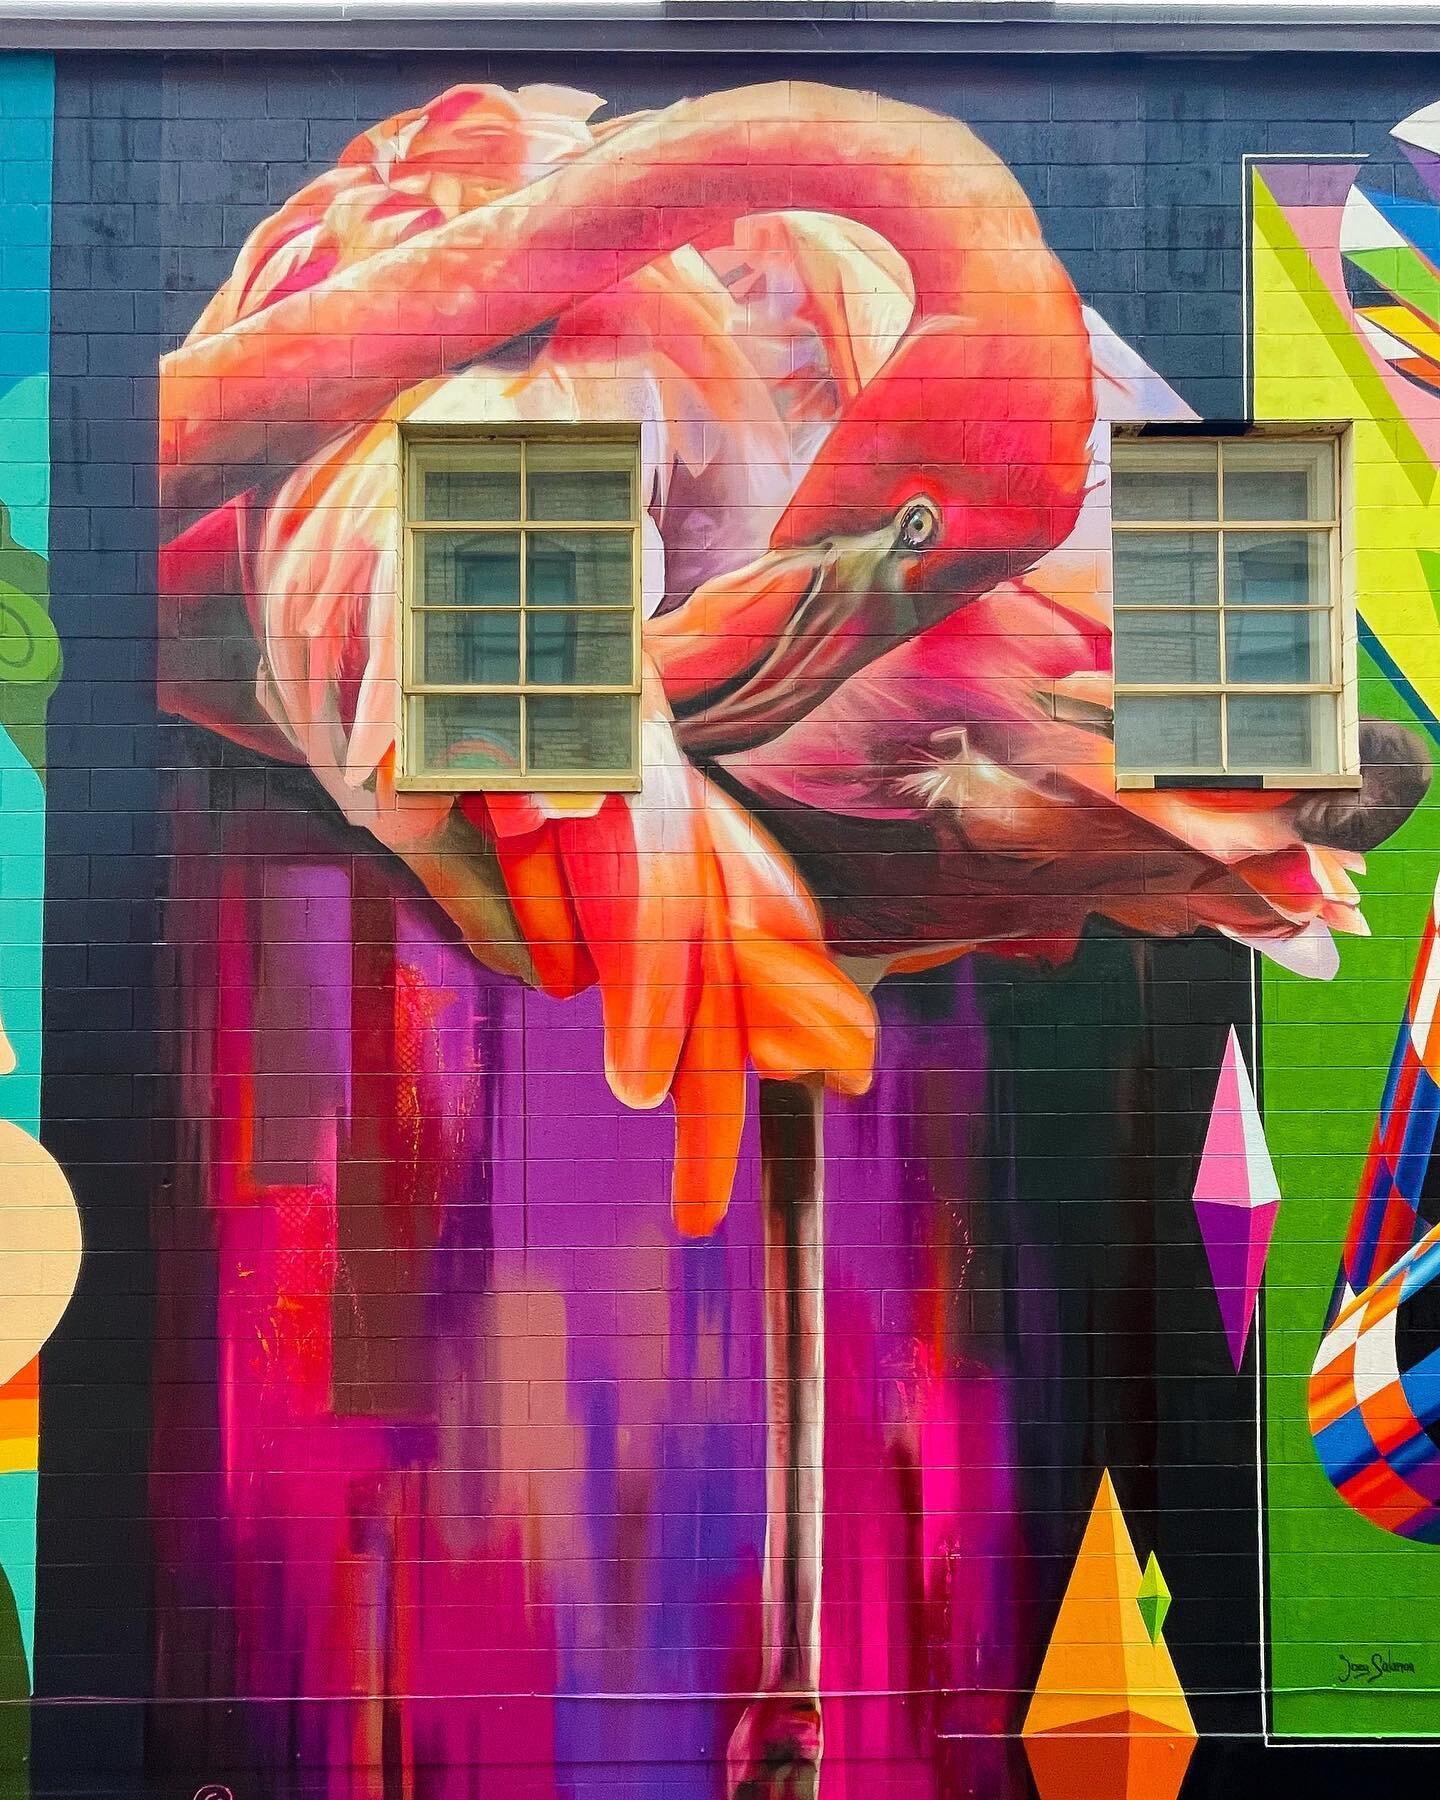 Final Mural by @zachcurtisartwork for #BrightWallsJackson 2022

📍141 E. Michigan Avenue, Jackson, MI 49201 USA

Vast and vivid, this flamingo is sure to catch your attention! 🦩Zach brought the the tropics to Michigan, which will hopefully add some 